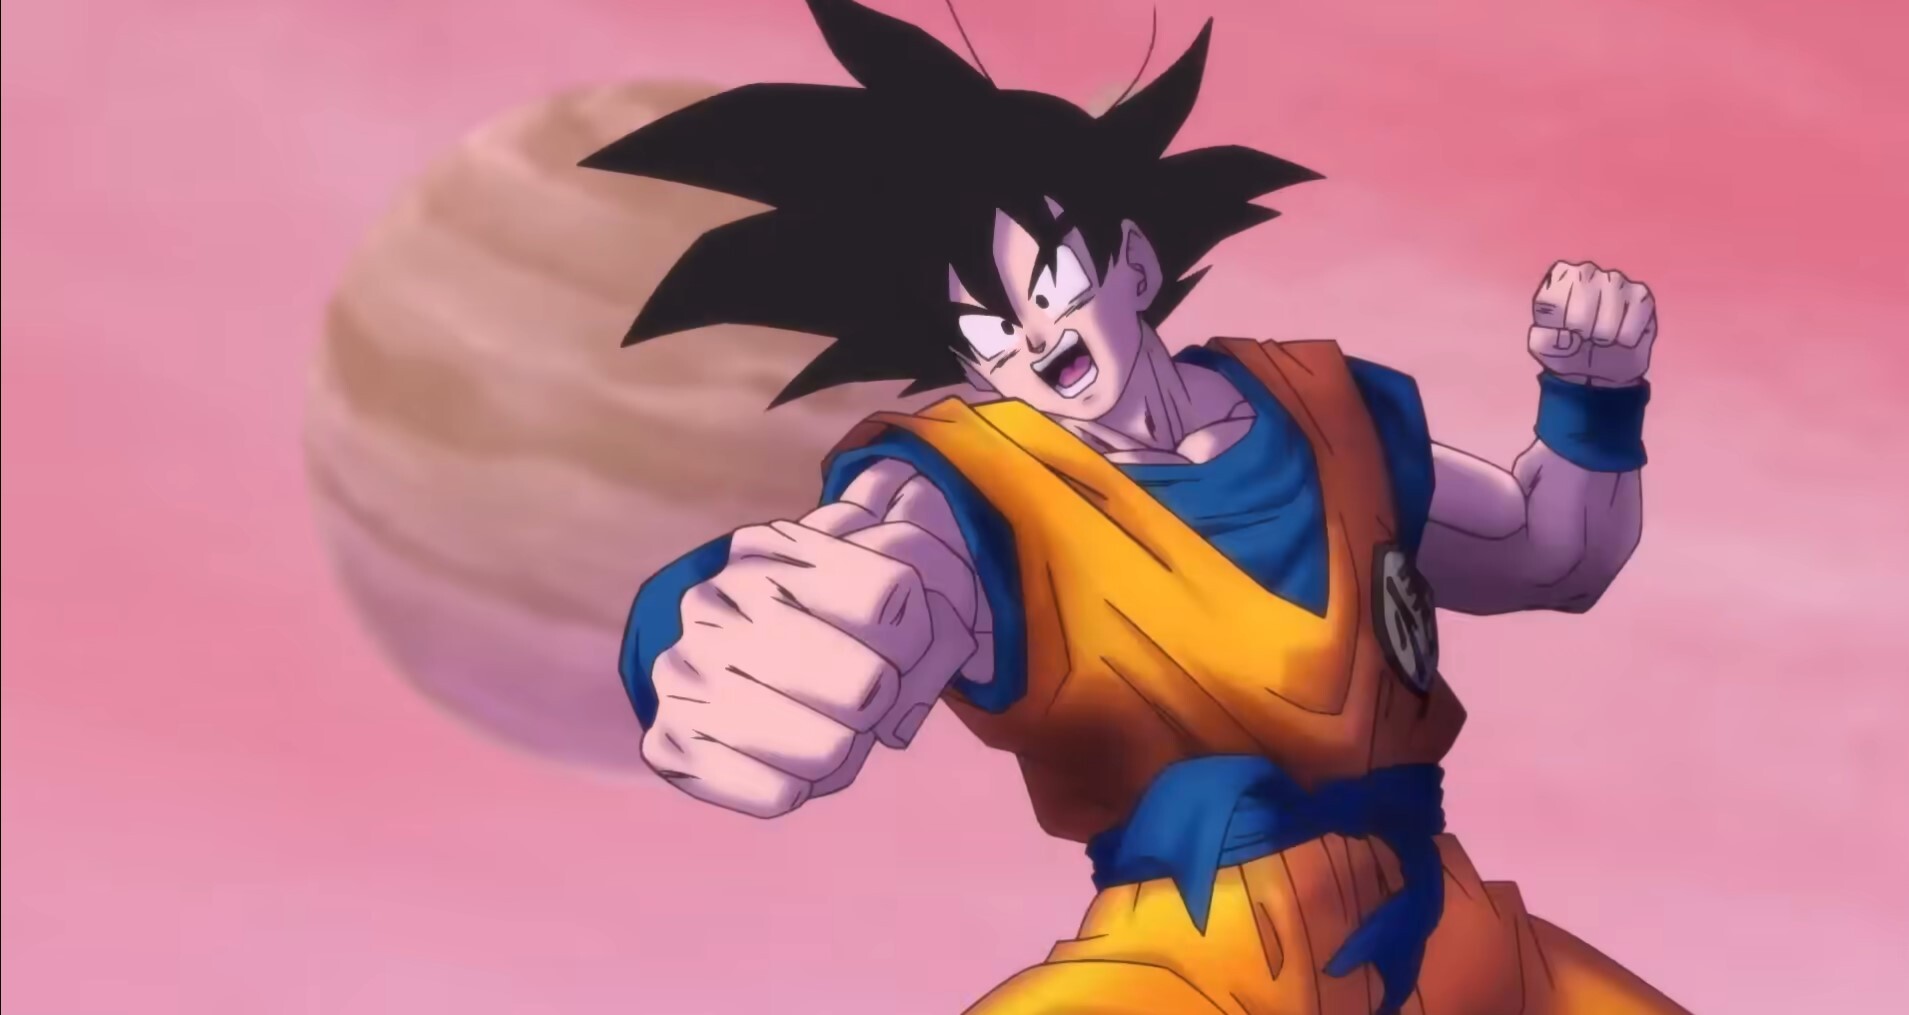 Goku delivering a punch in Dragon Ball Super: Super Hero